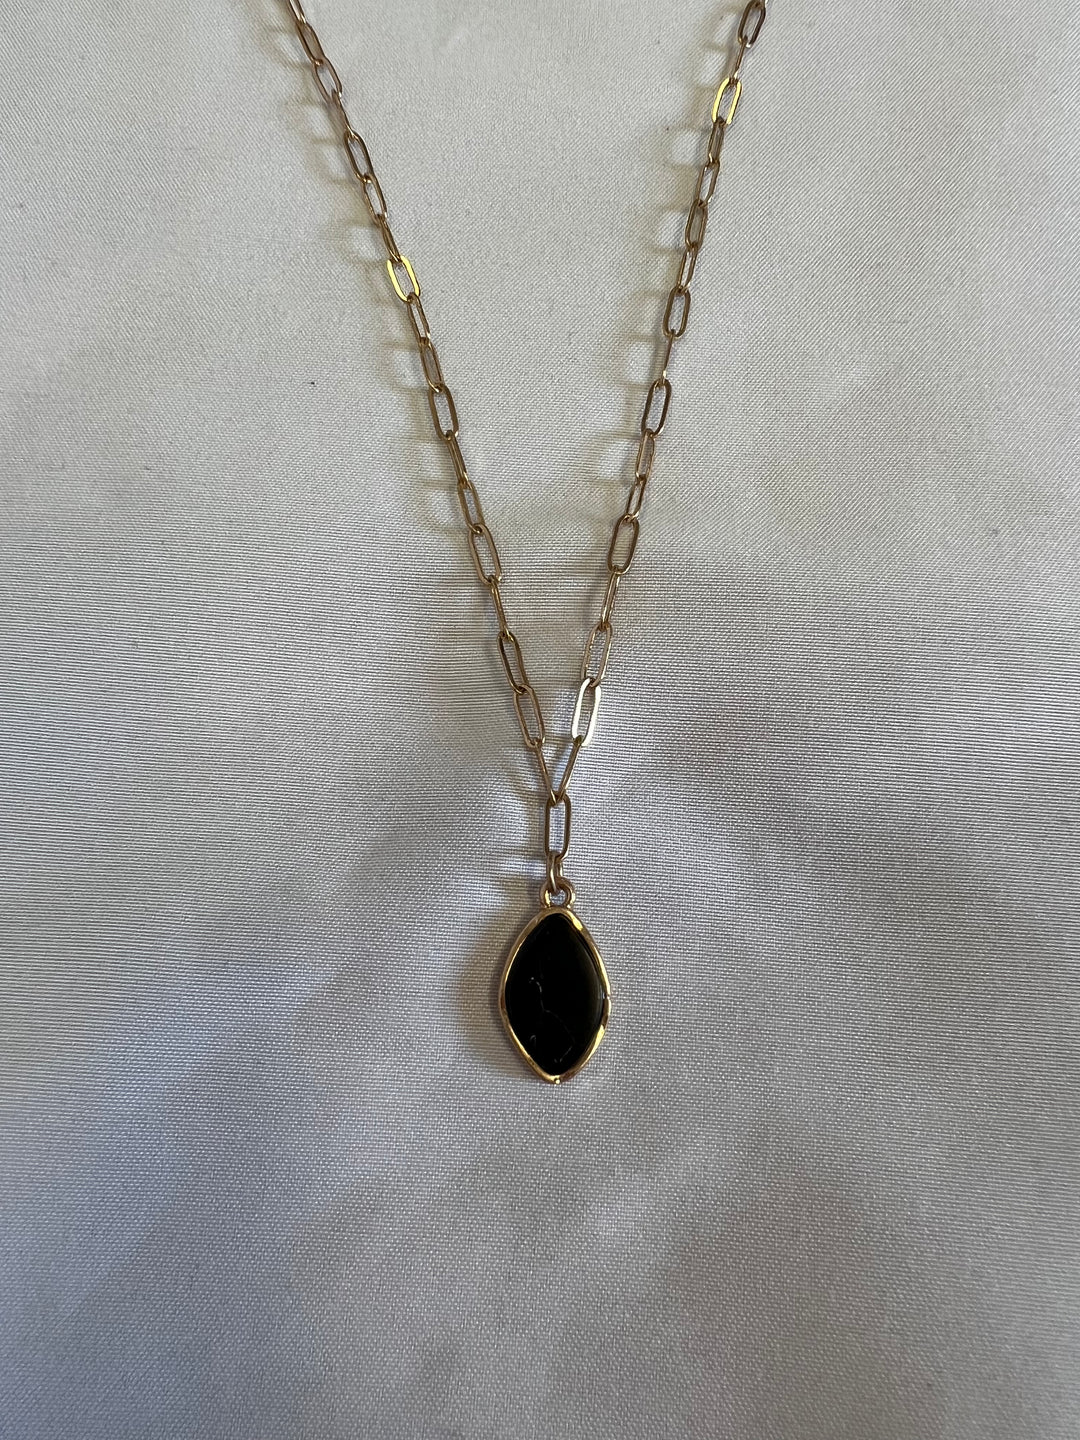 Stone Chain Link Necklace - Gold Black